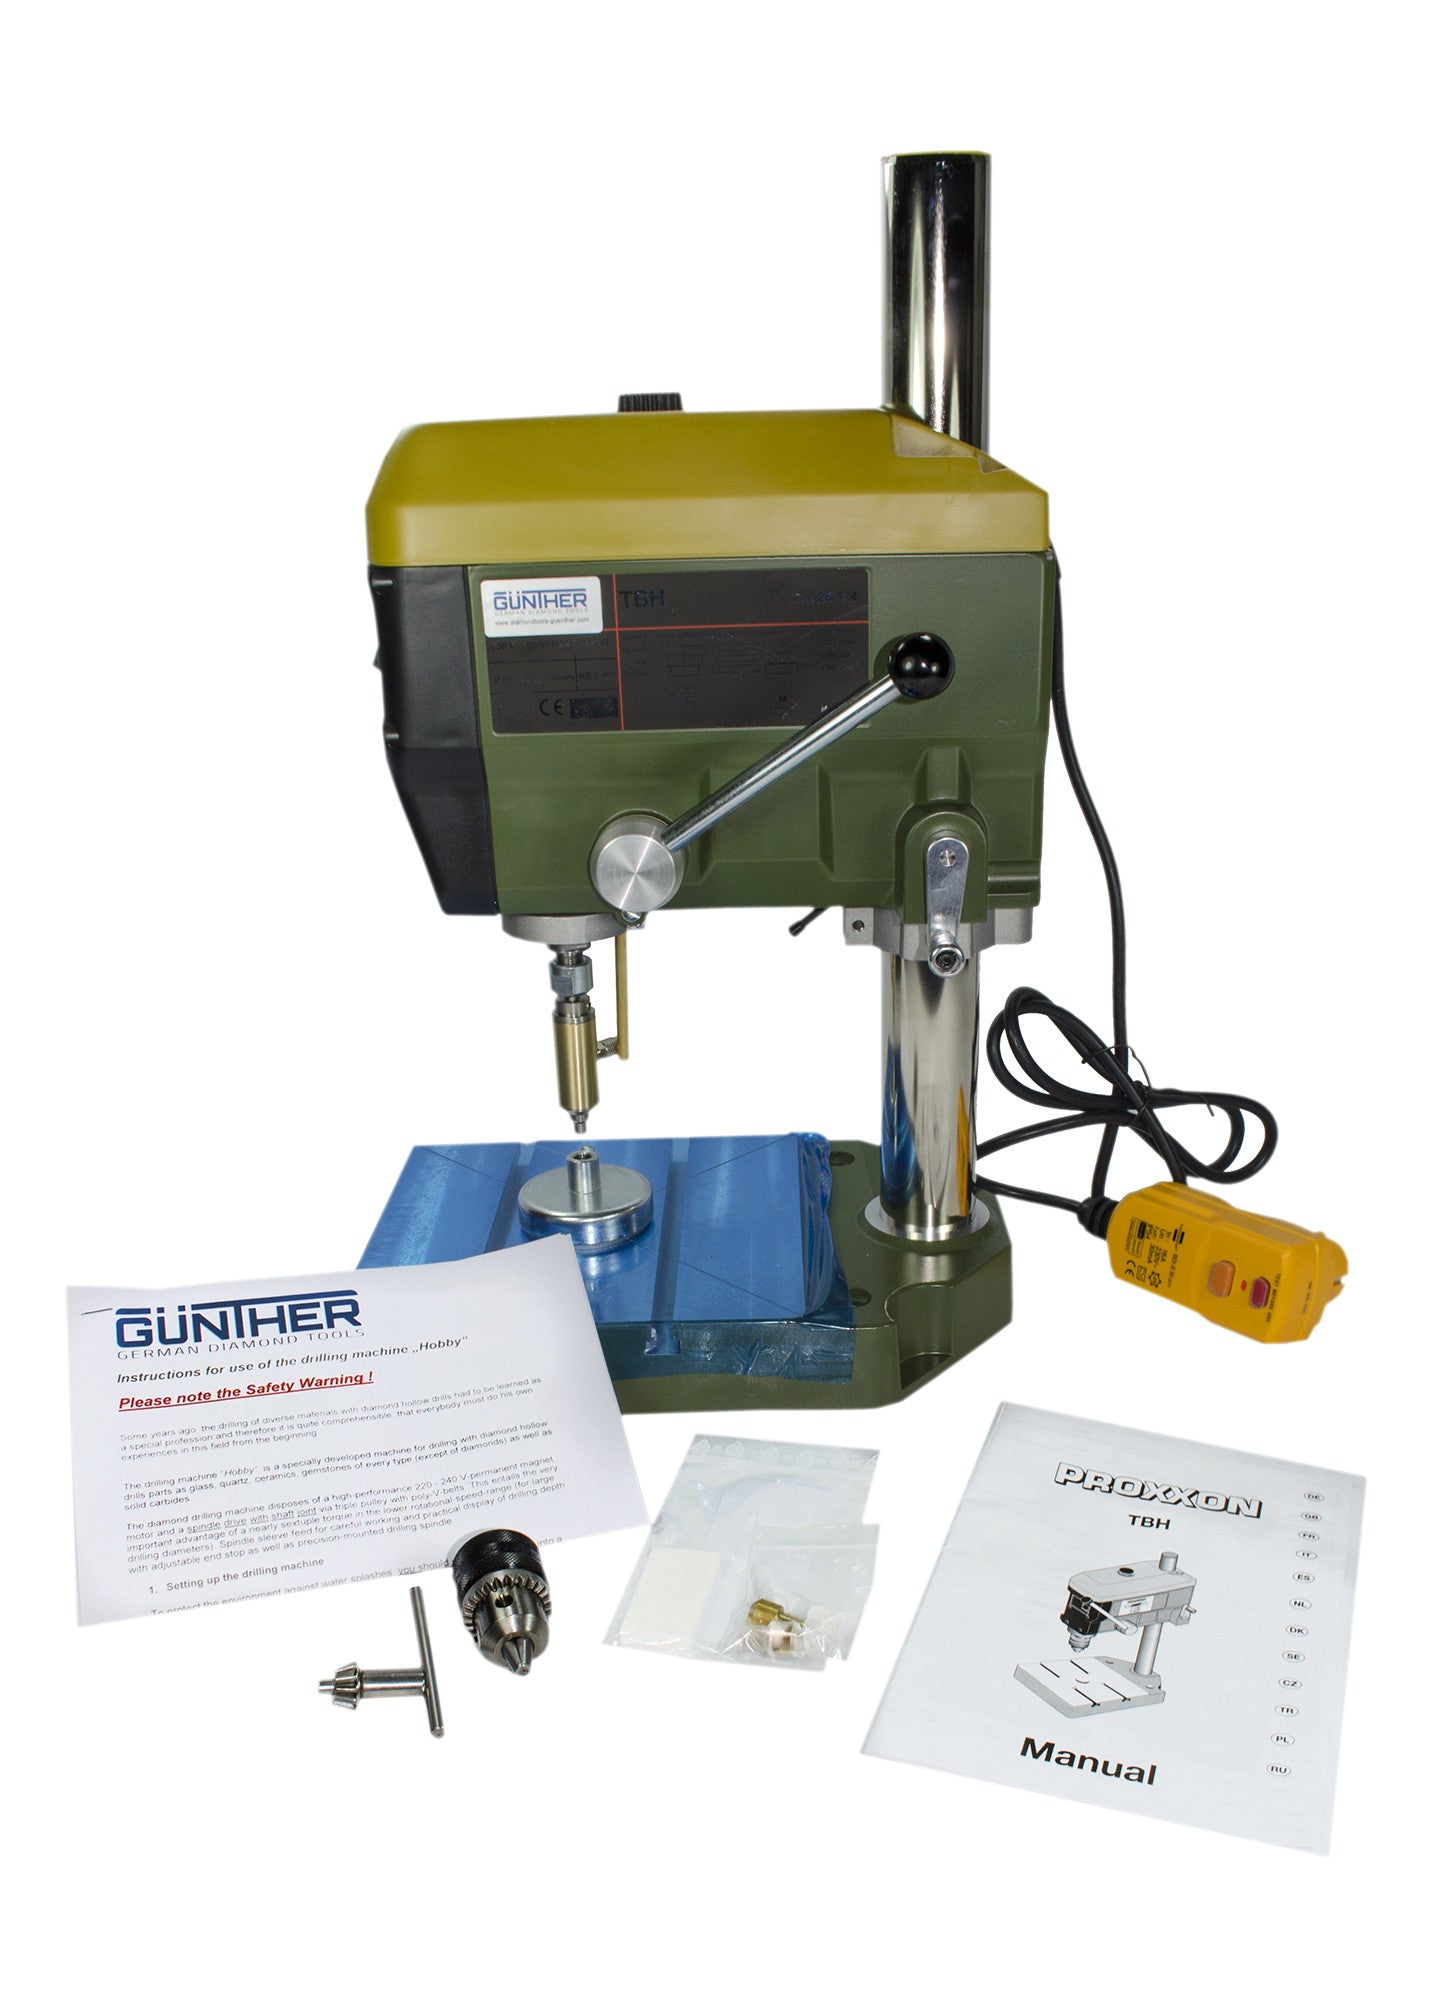 How to Setup Your Gunther Hobby Drilling System